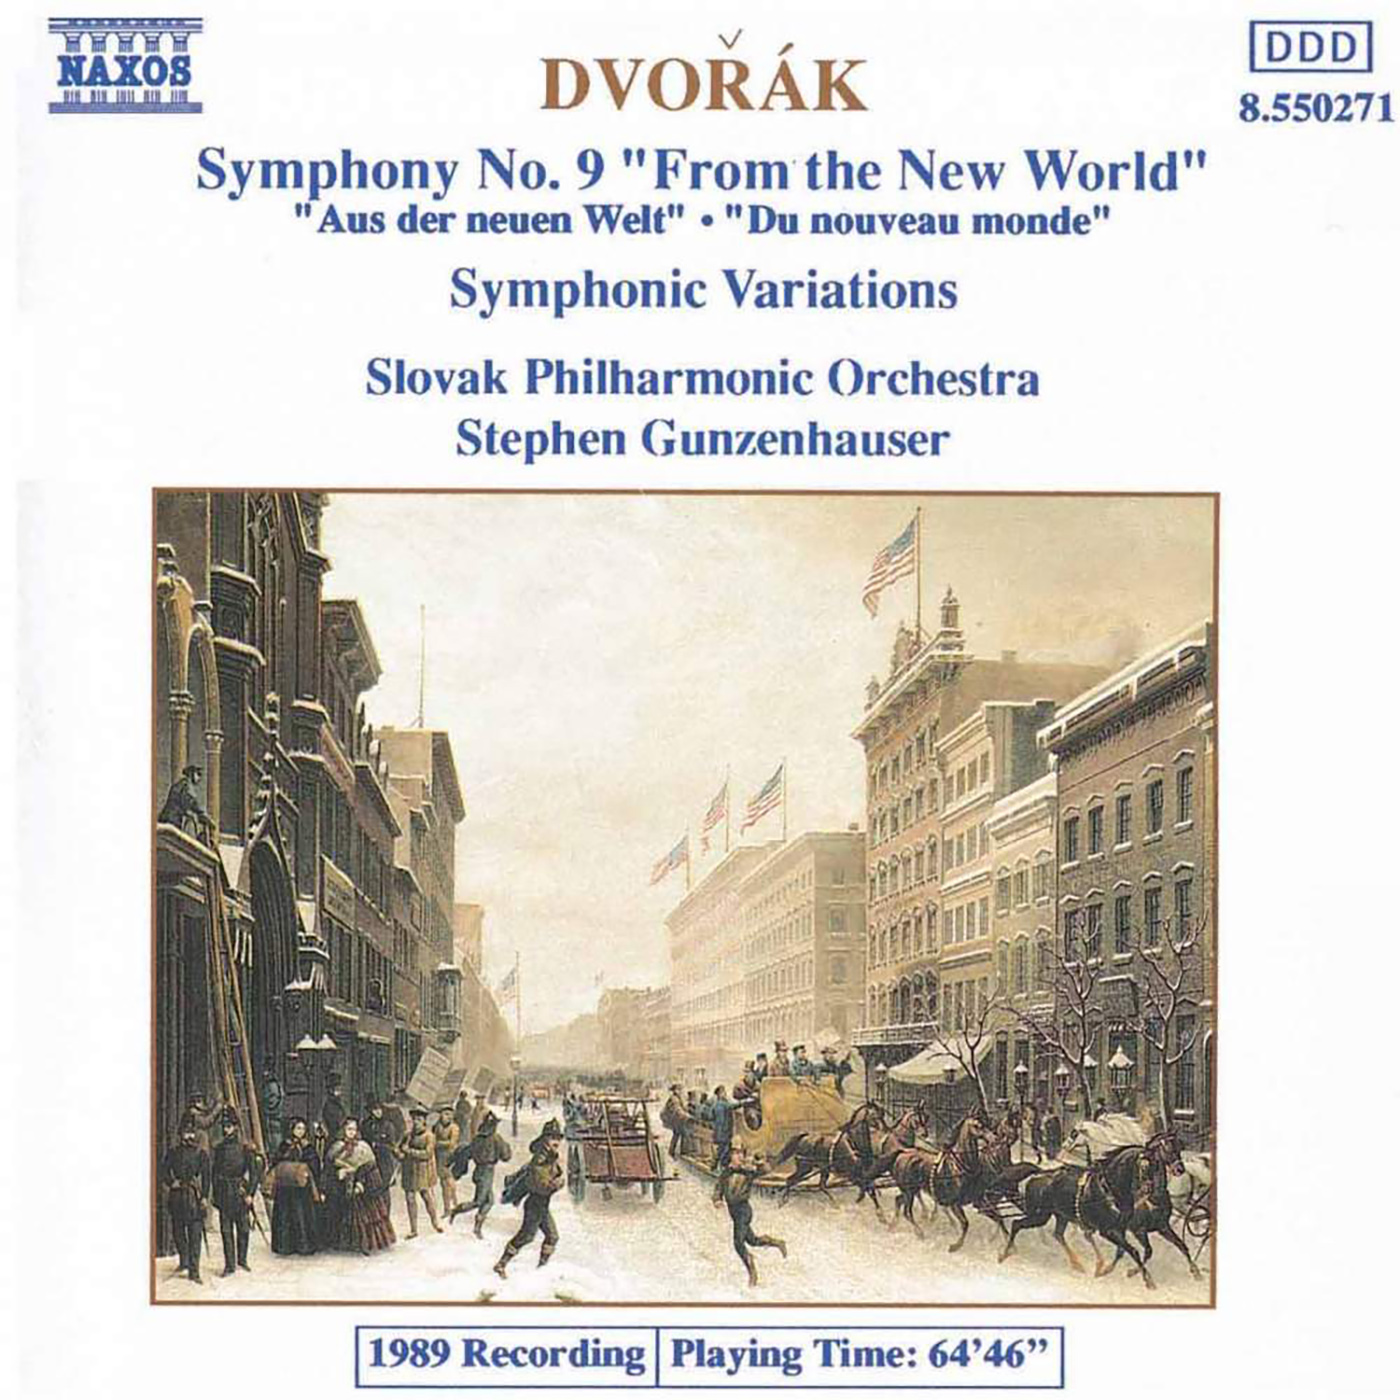 Symphony No. 9 in E Minor, Op. 95, B. 178, "From the New World": IV. Allegro con fuoco